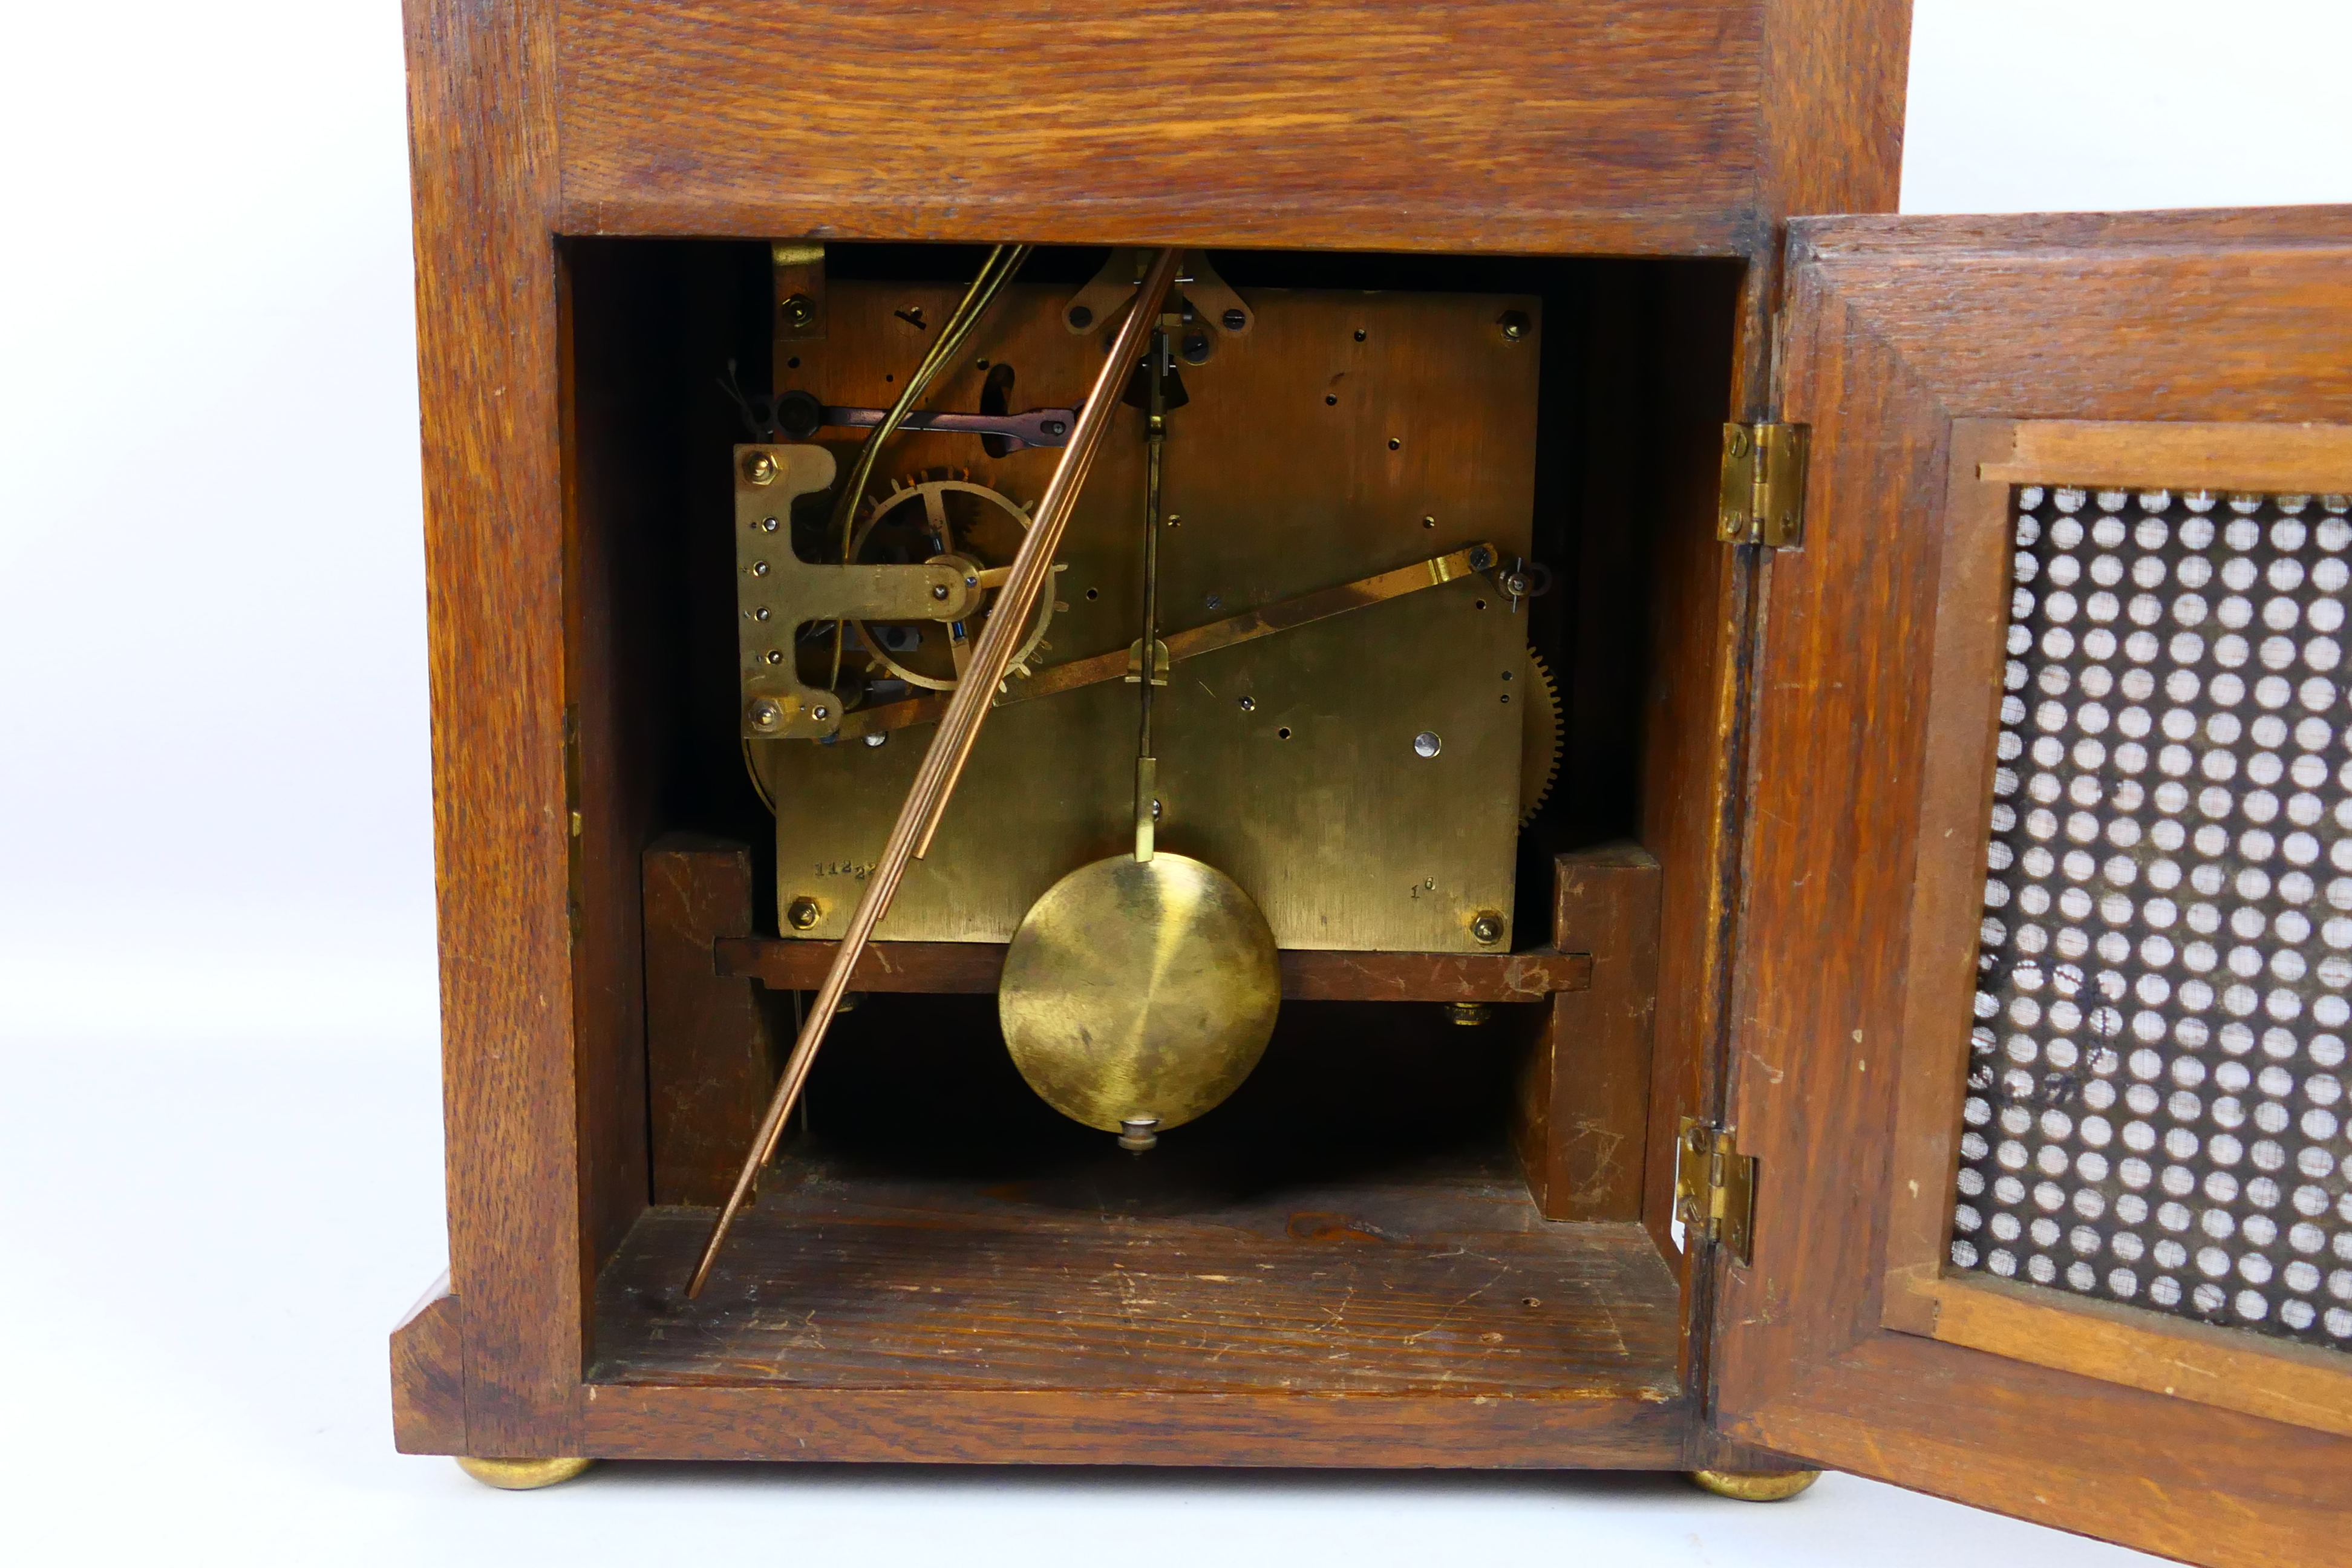 An early 20th century oak cased Westminster chiming mantel clock, the case of a medium oak colour, - Image 8 of 9